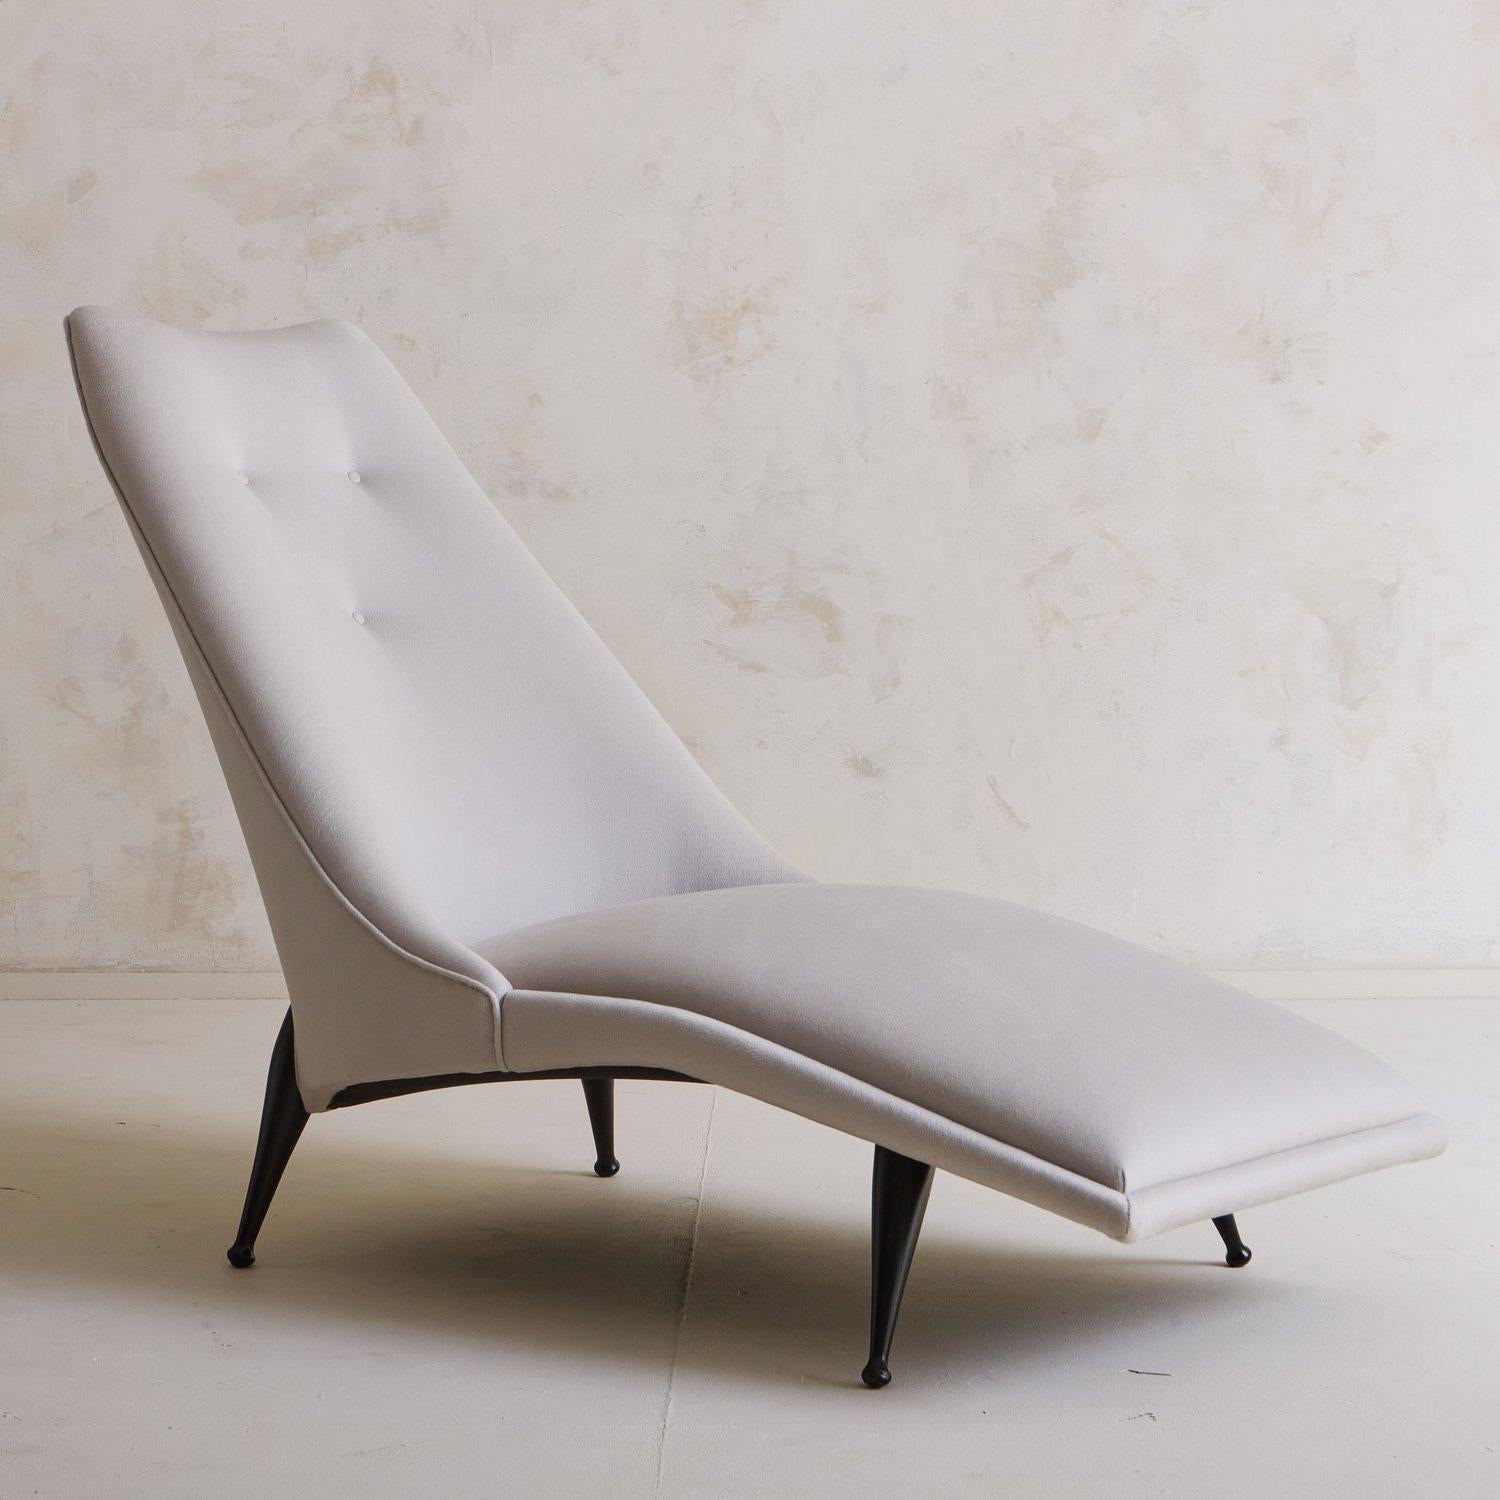 A rare ‘Beautiful Dreamer’ chaise lounge designed by Ben Seibel in the 1950s. This lounge has an elongated curved seat and a dramatically angled back with three tufts and welt detailing. It was newly reupholstered in a pale gray wool blend fabric